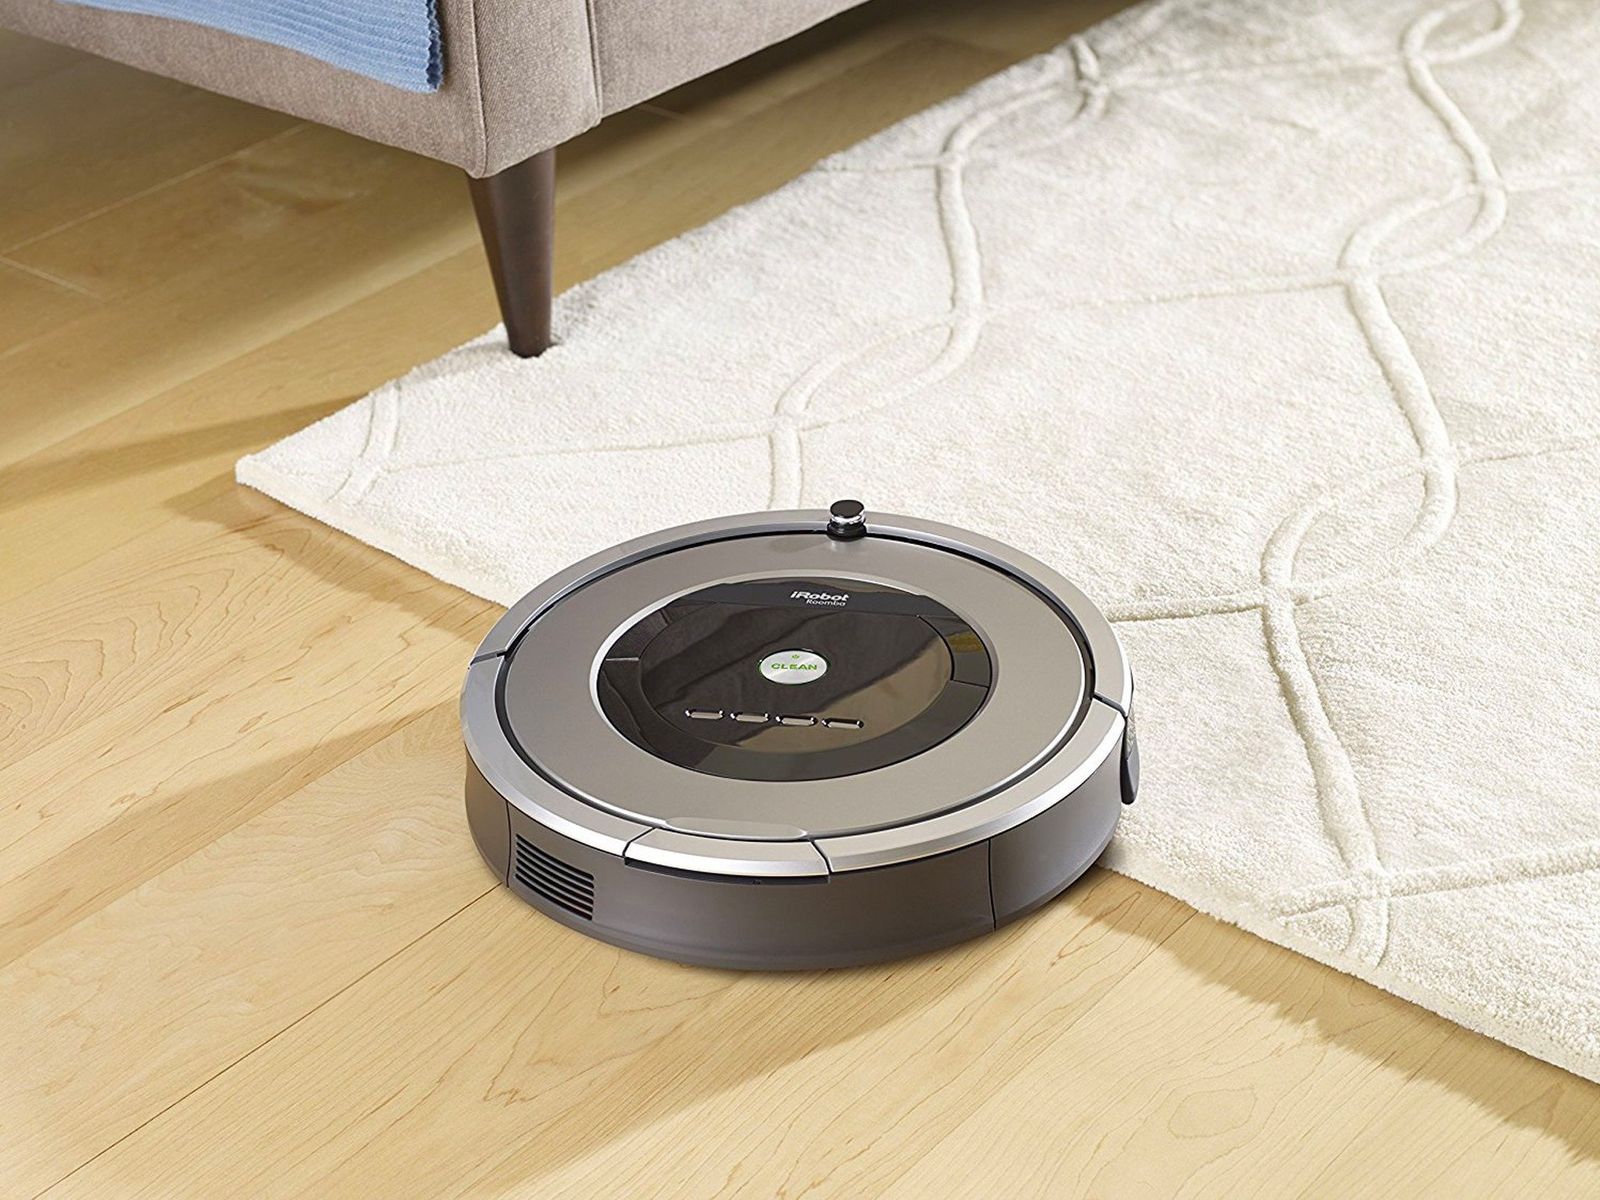 Best Robot Vacuums For Pets 2022, Best Robot Vacuum For Pet Hair And Hardwood Floors 2020